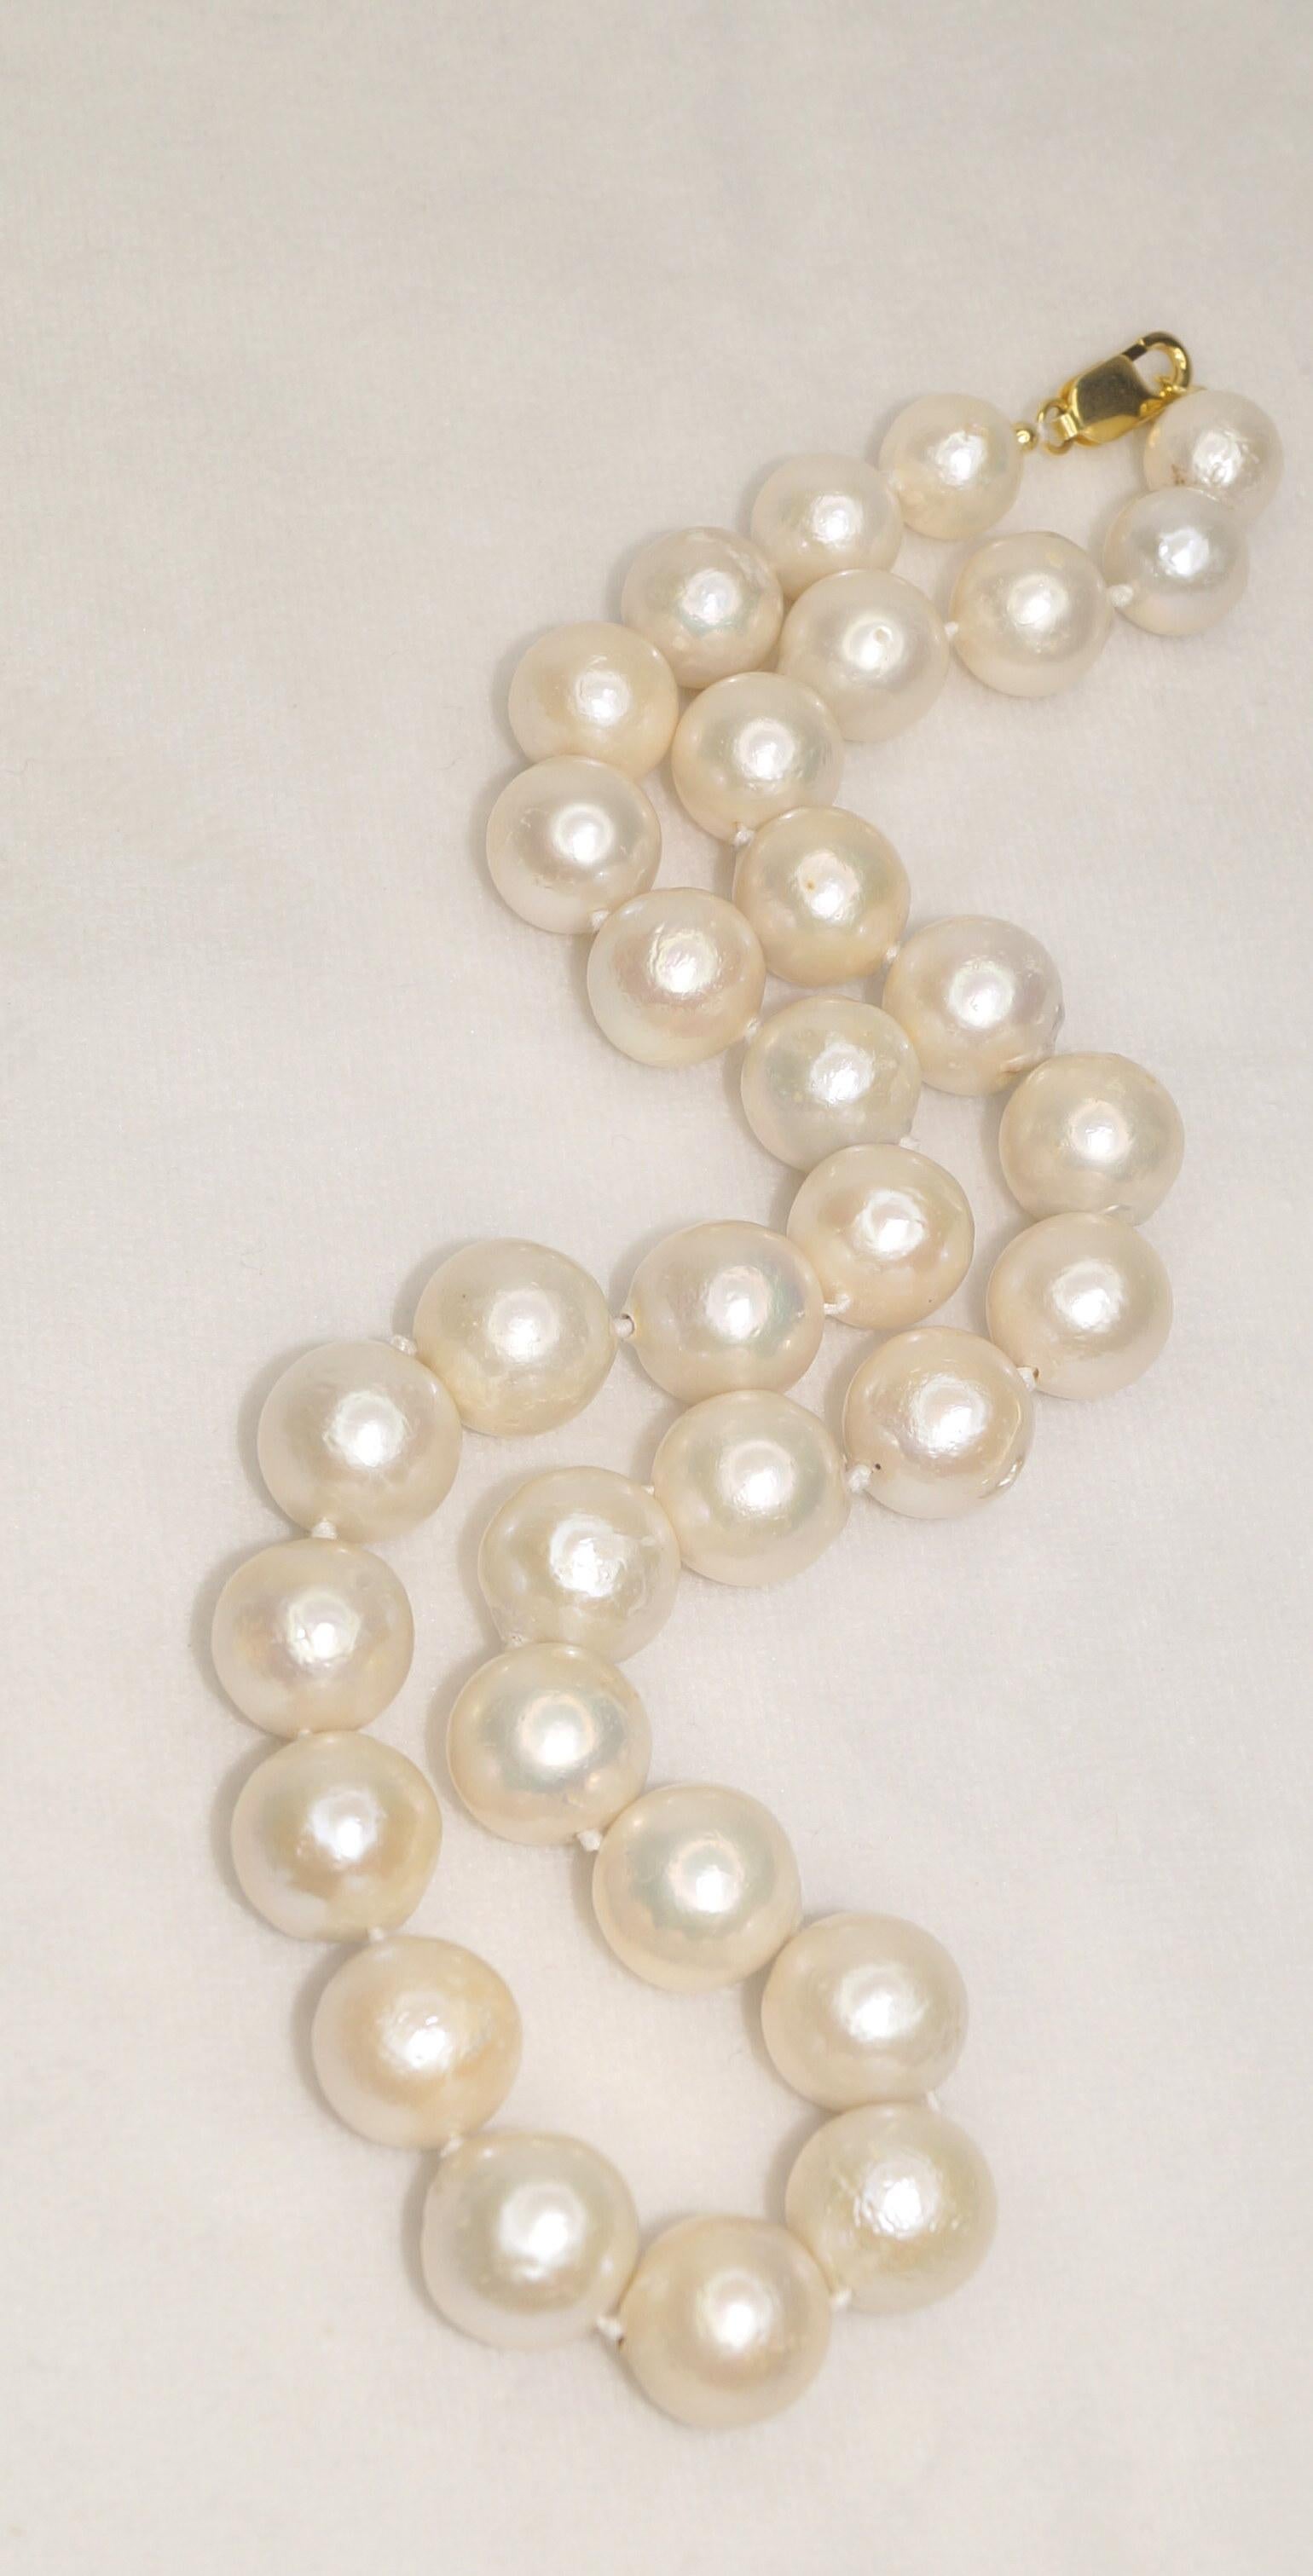 14k Gold South Sea Pearl necklace 12-15mm Big Round Wedding necklace  For Sale 1